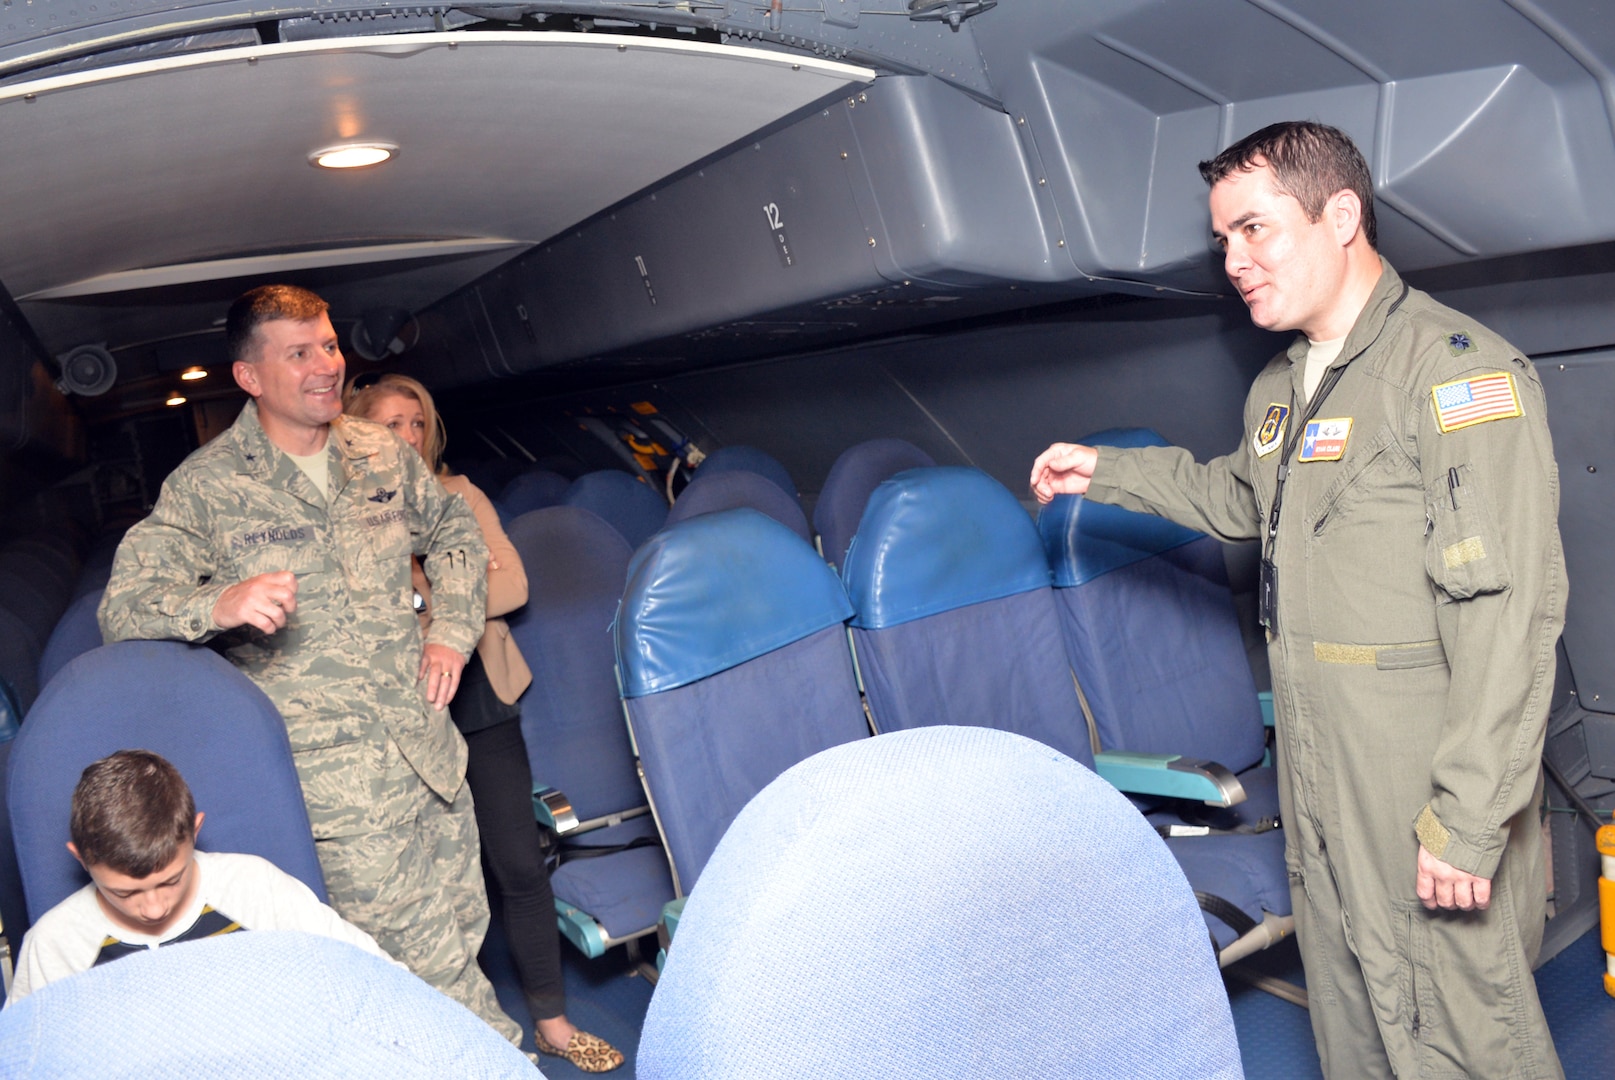 Lt. Col. Ryan A. Clark, 356th Airlift Squadron flight instructor, describes troop compartment features and capabilities to Brig. Gen. George M. Reynolds, 25th Air Force vice commander, at Joint Base San Antonio-Lackland, Texas Nov. 2, 2018.